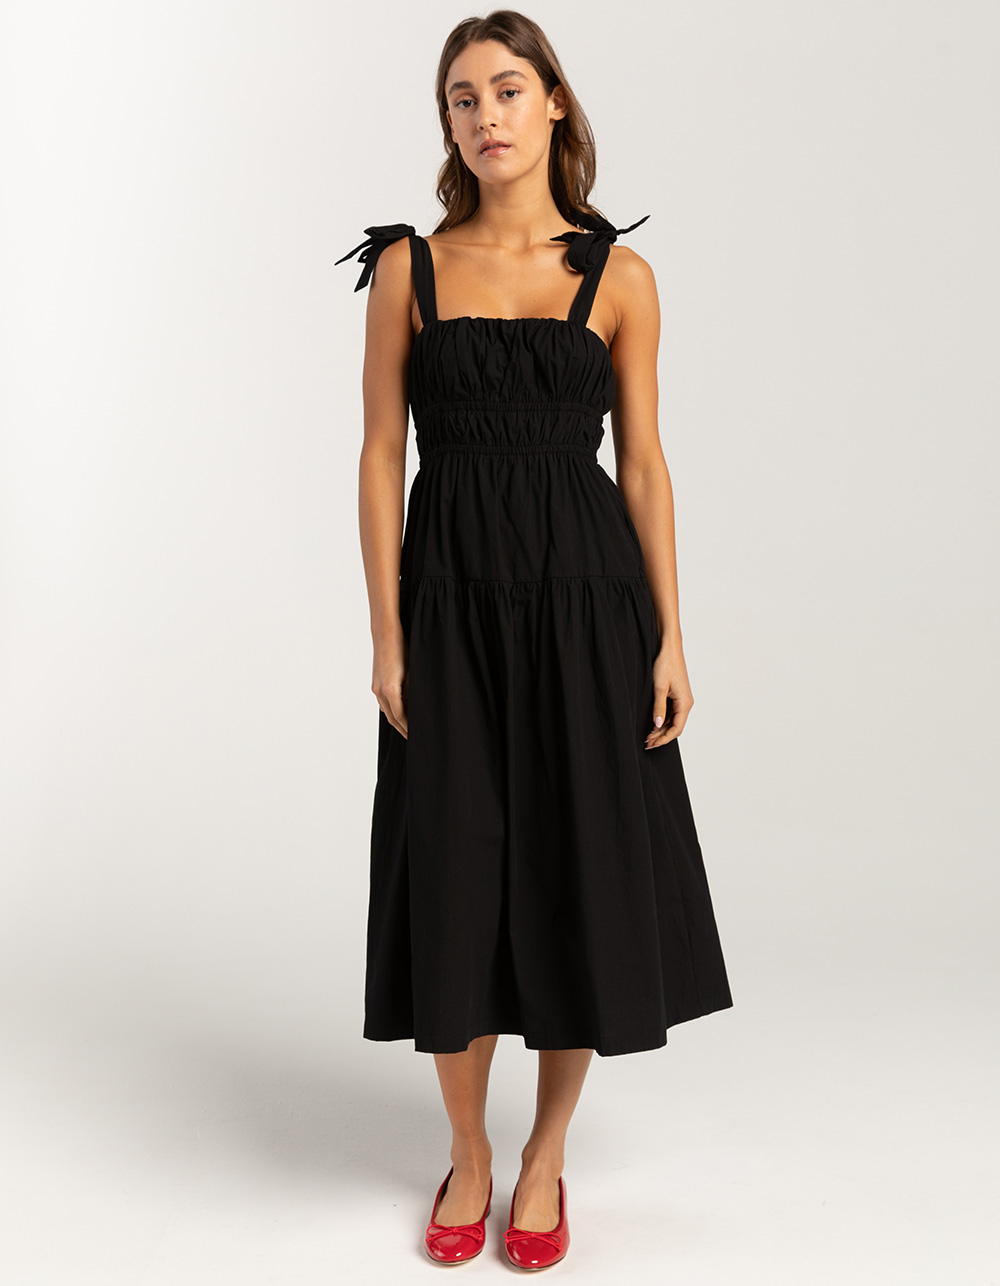 WEST OF MELROSE Tiered Womens Midi Dress